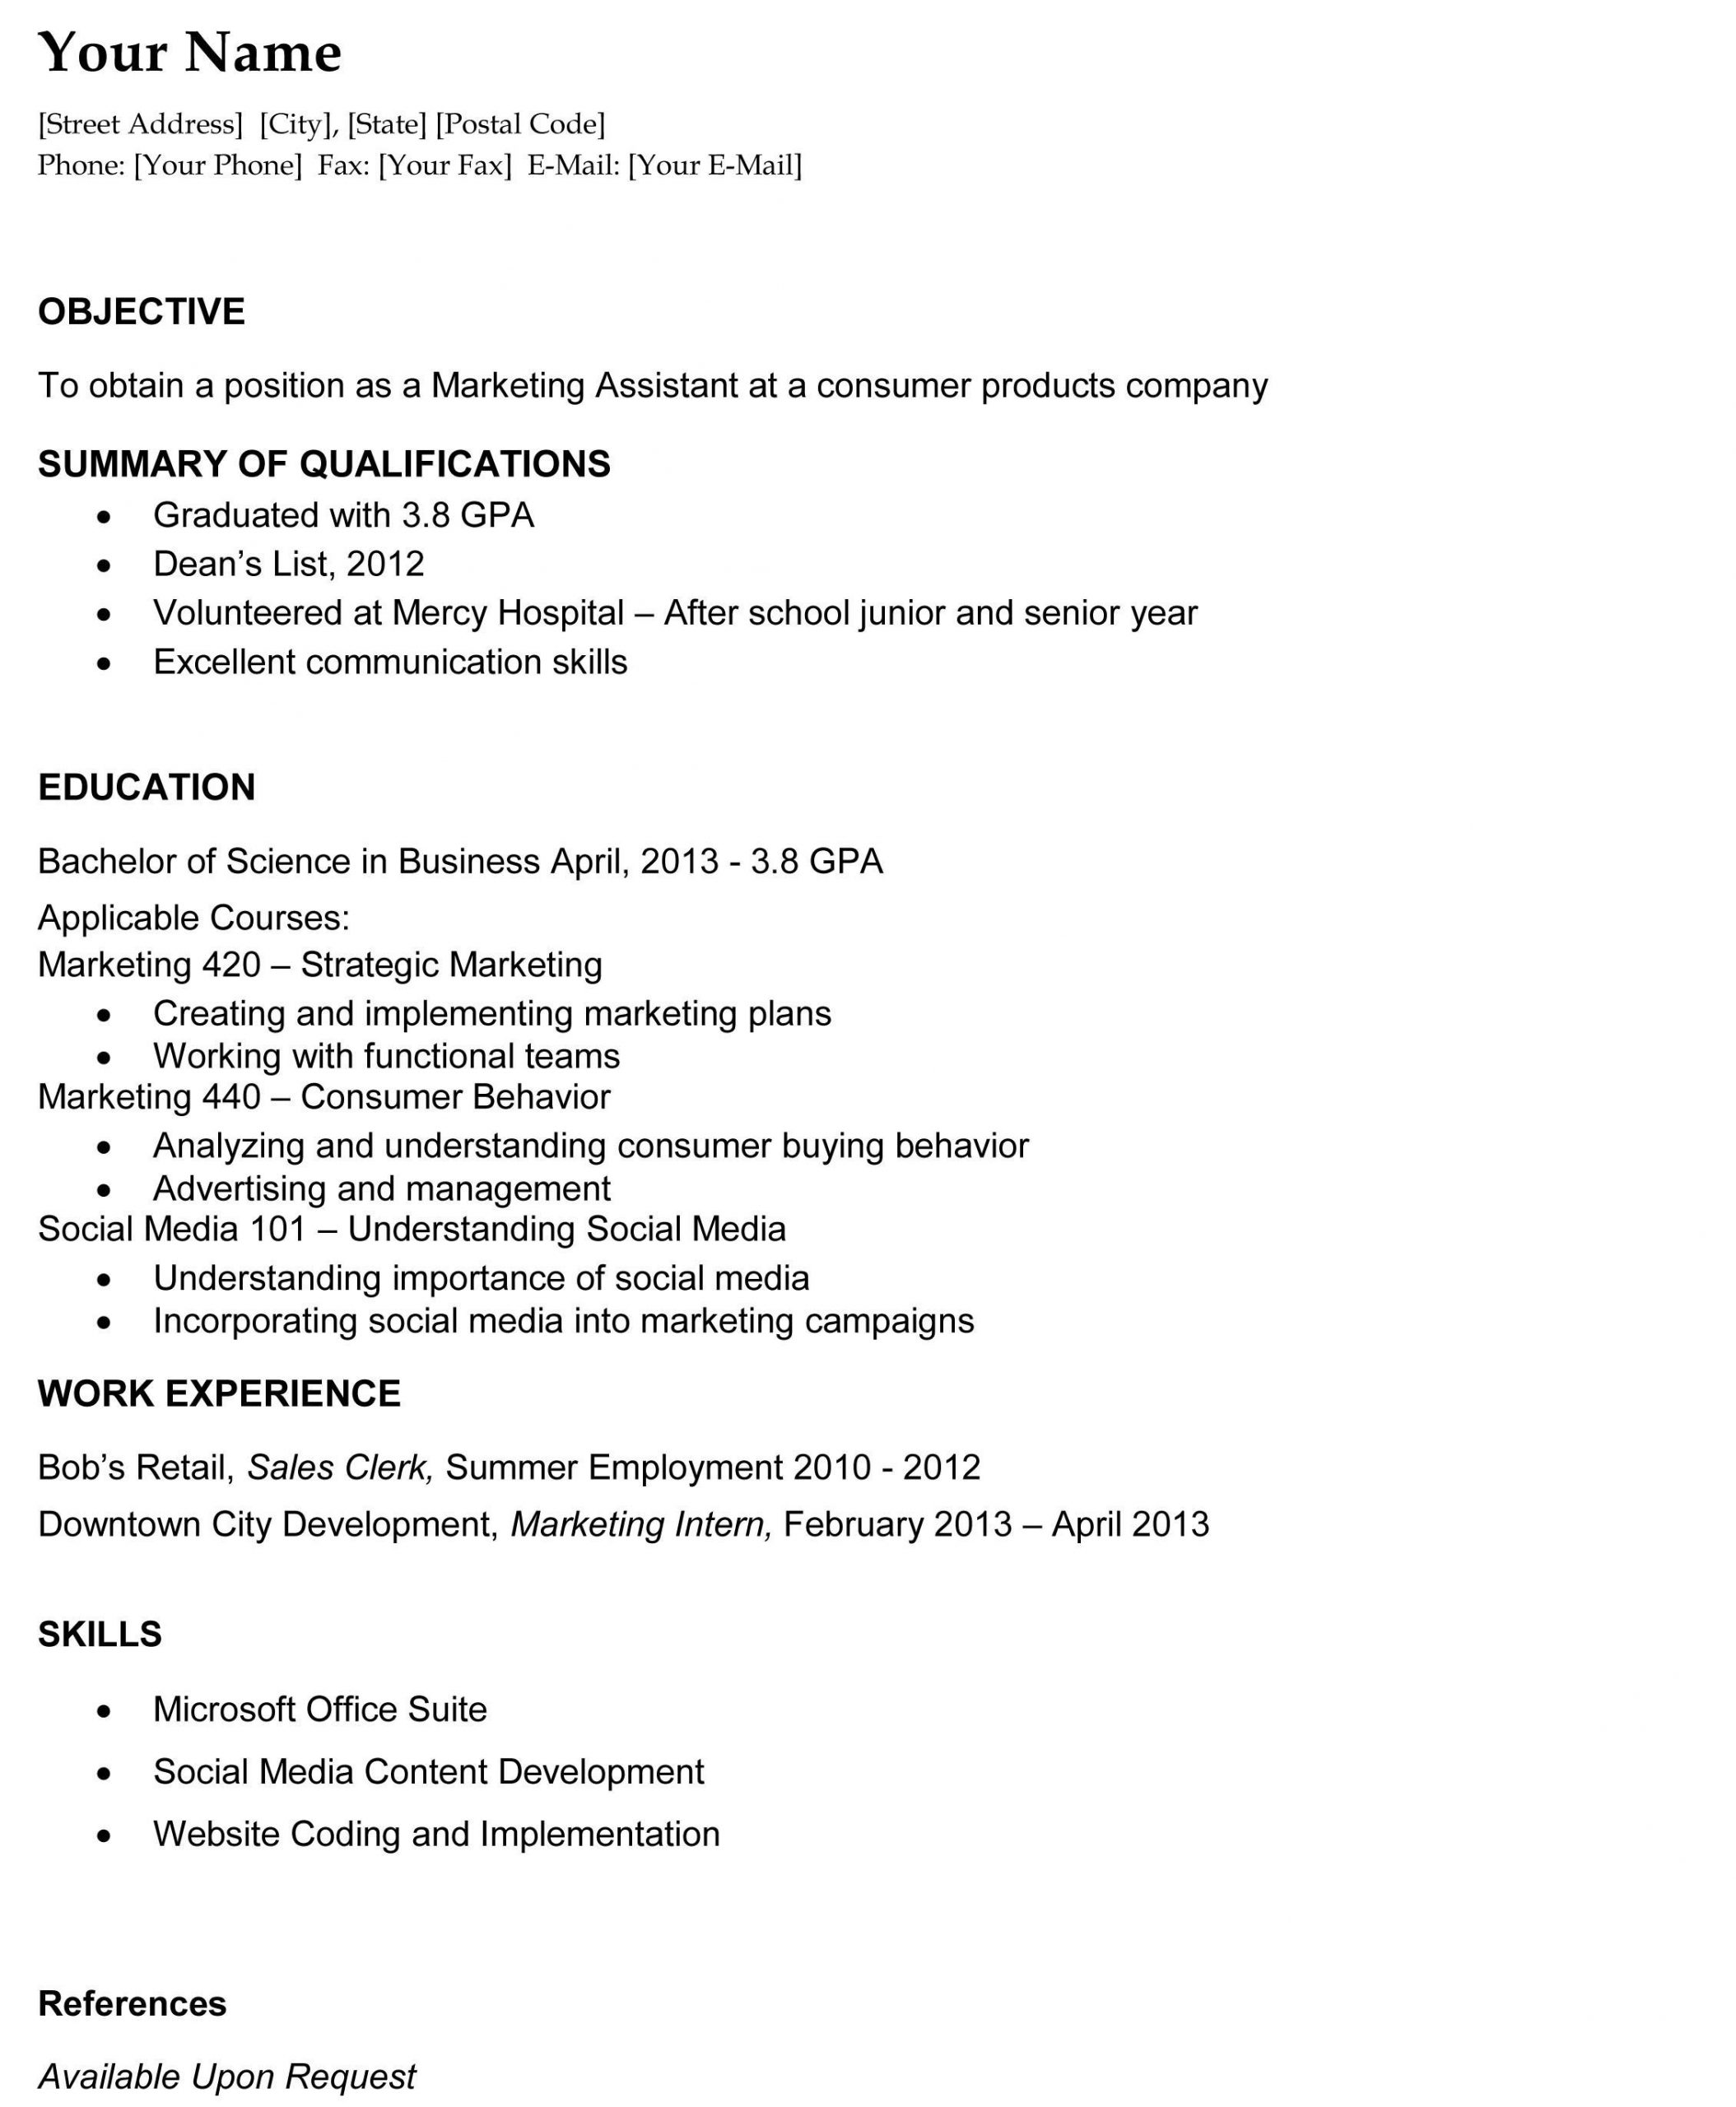 Sample Resume Objective for College Application College Resume Template – Http://www.jobresume.website/college …